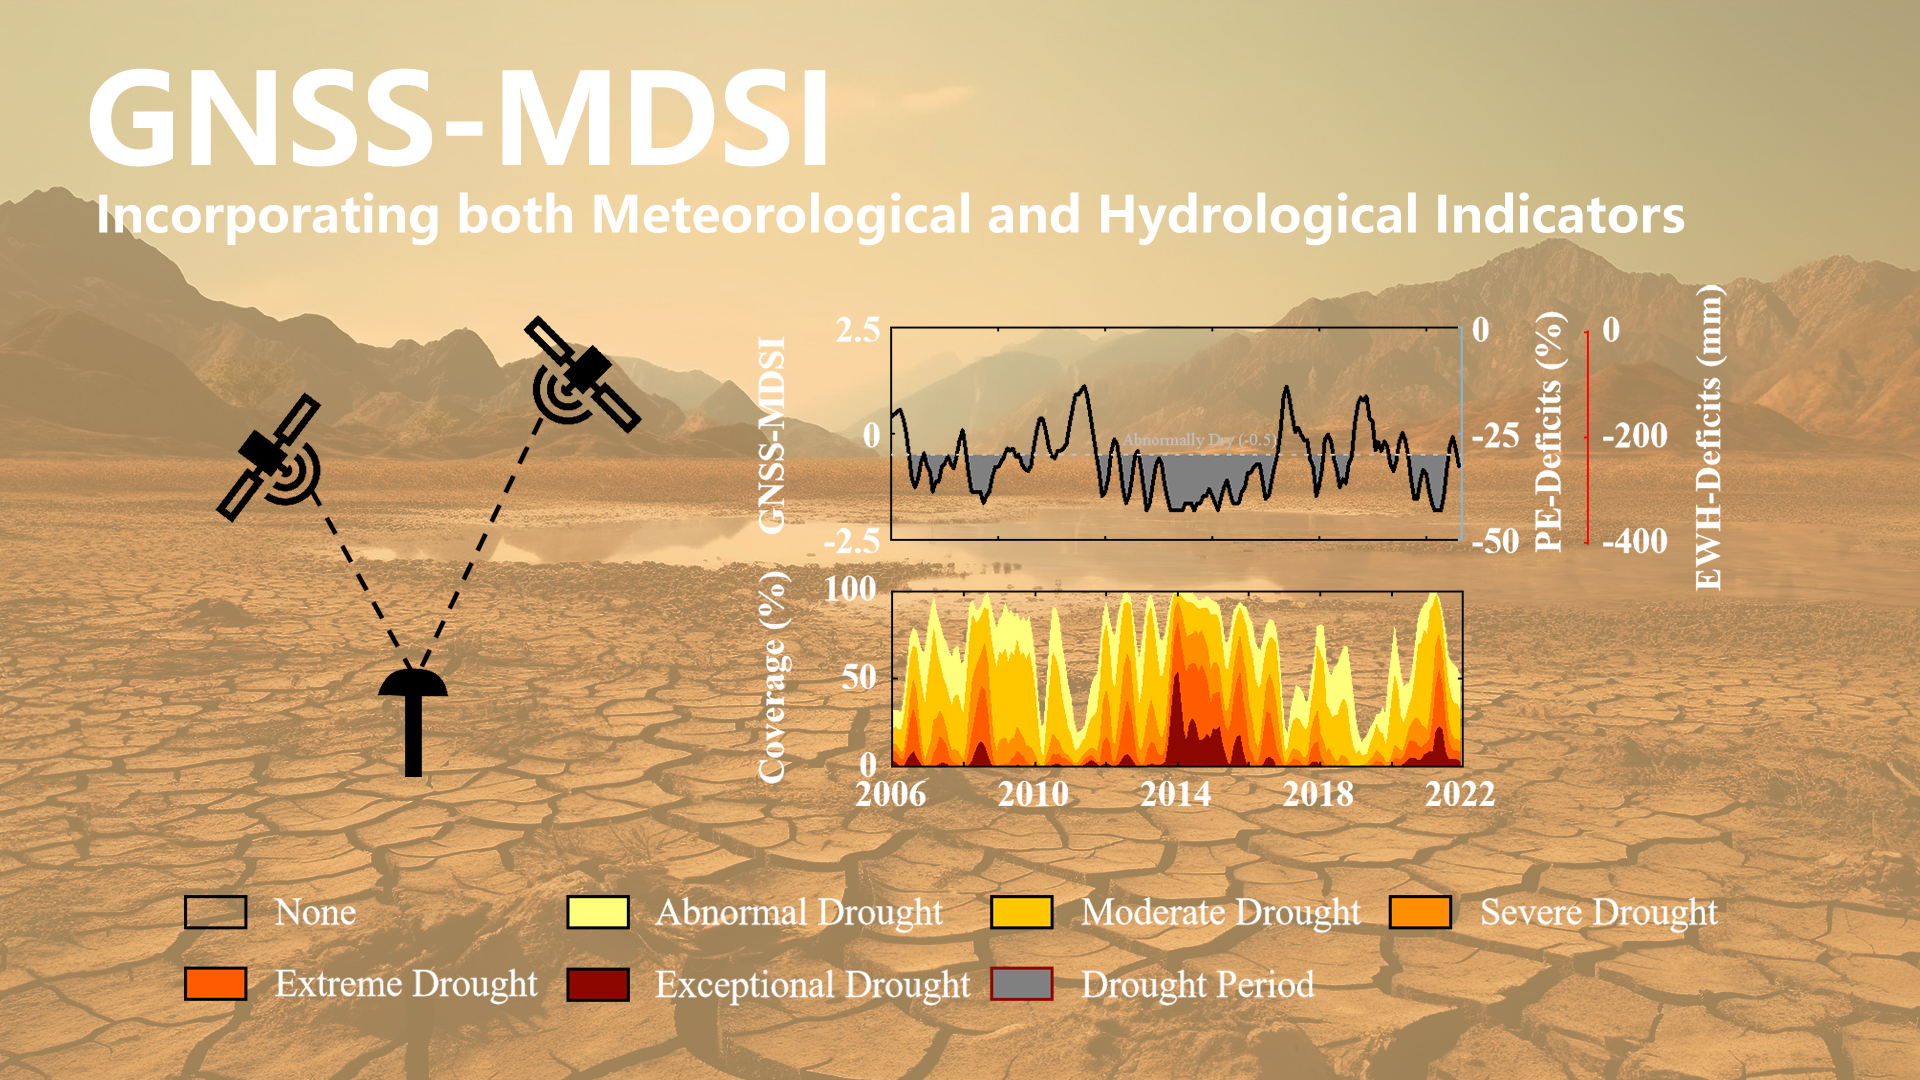 Researchers reveal integrated drought characterization using GNSS and precipitation data